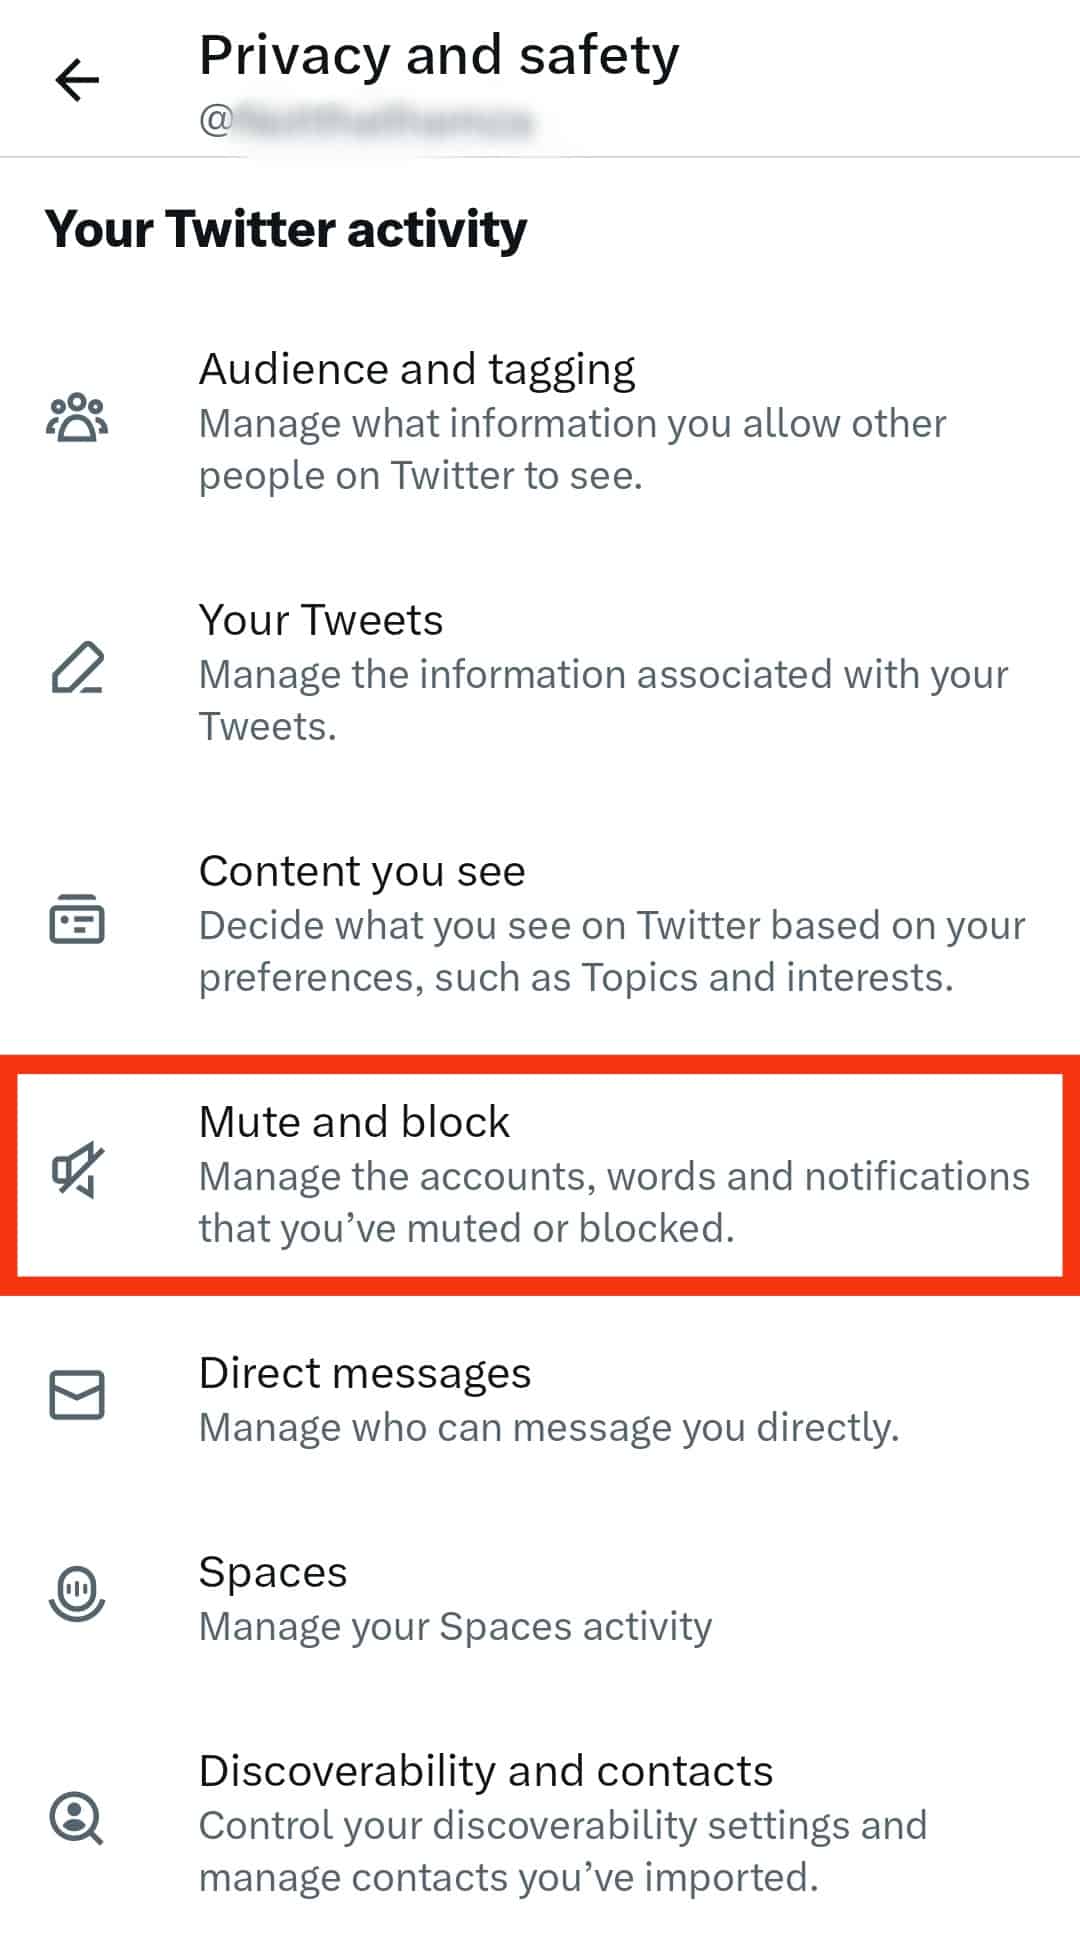 Click The Mute And Block Option